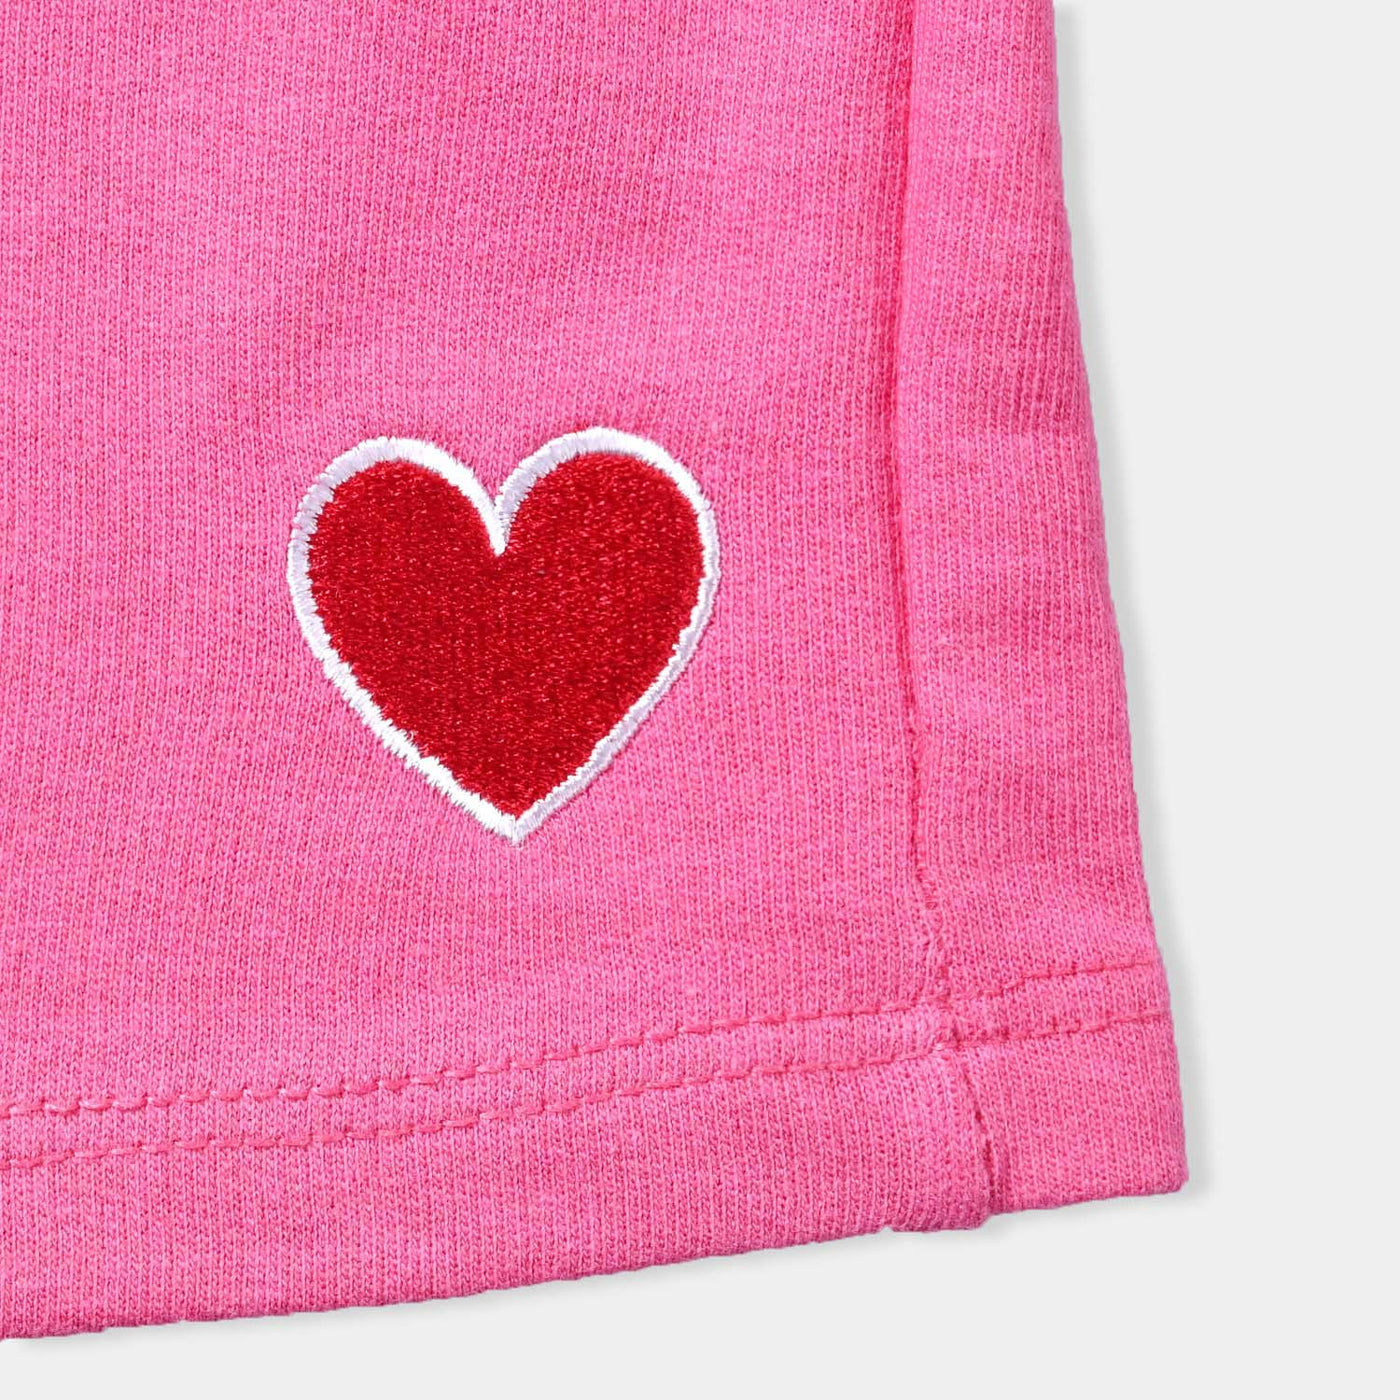 Infant Girls Cotton Terry Knitted Short Heart-Hot Pink